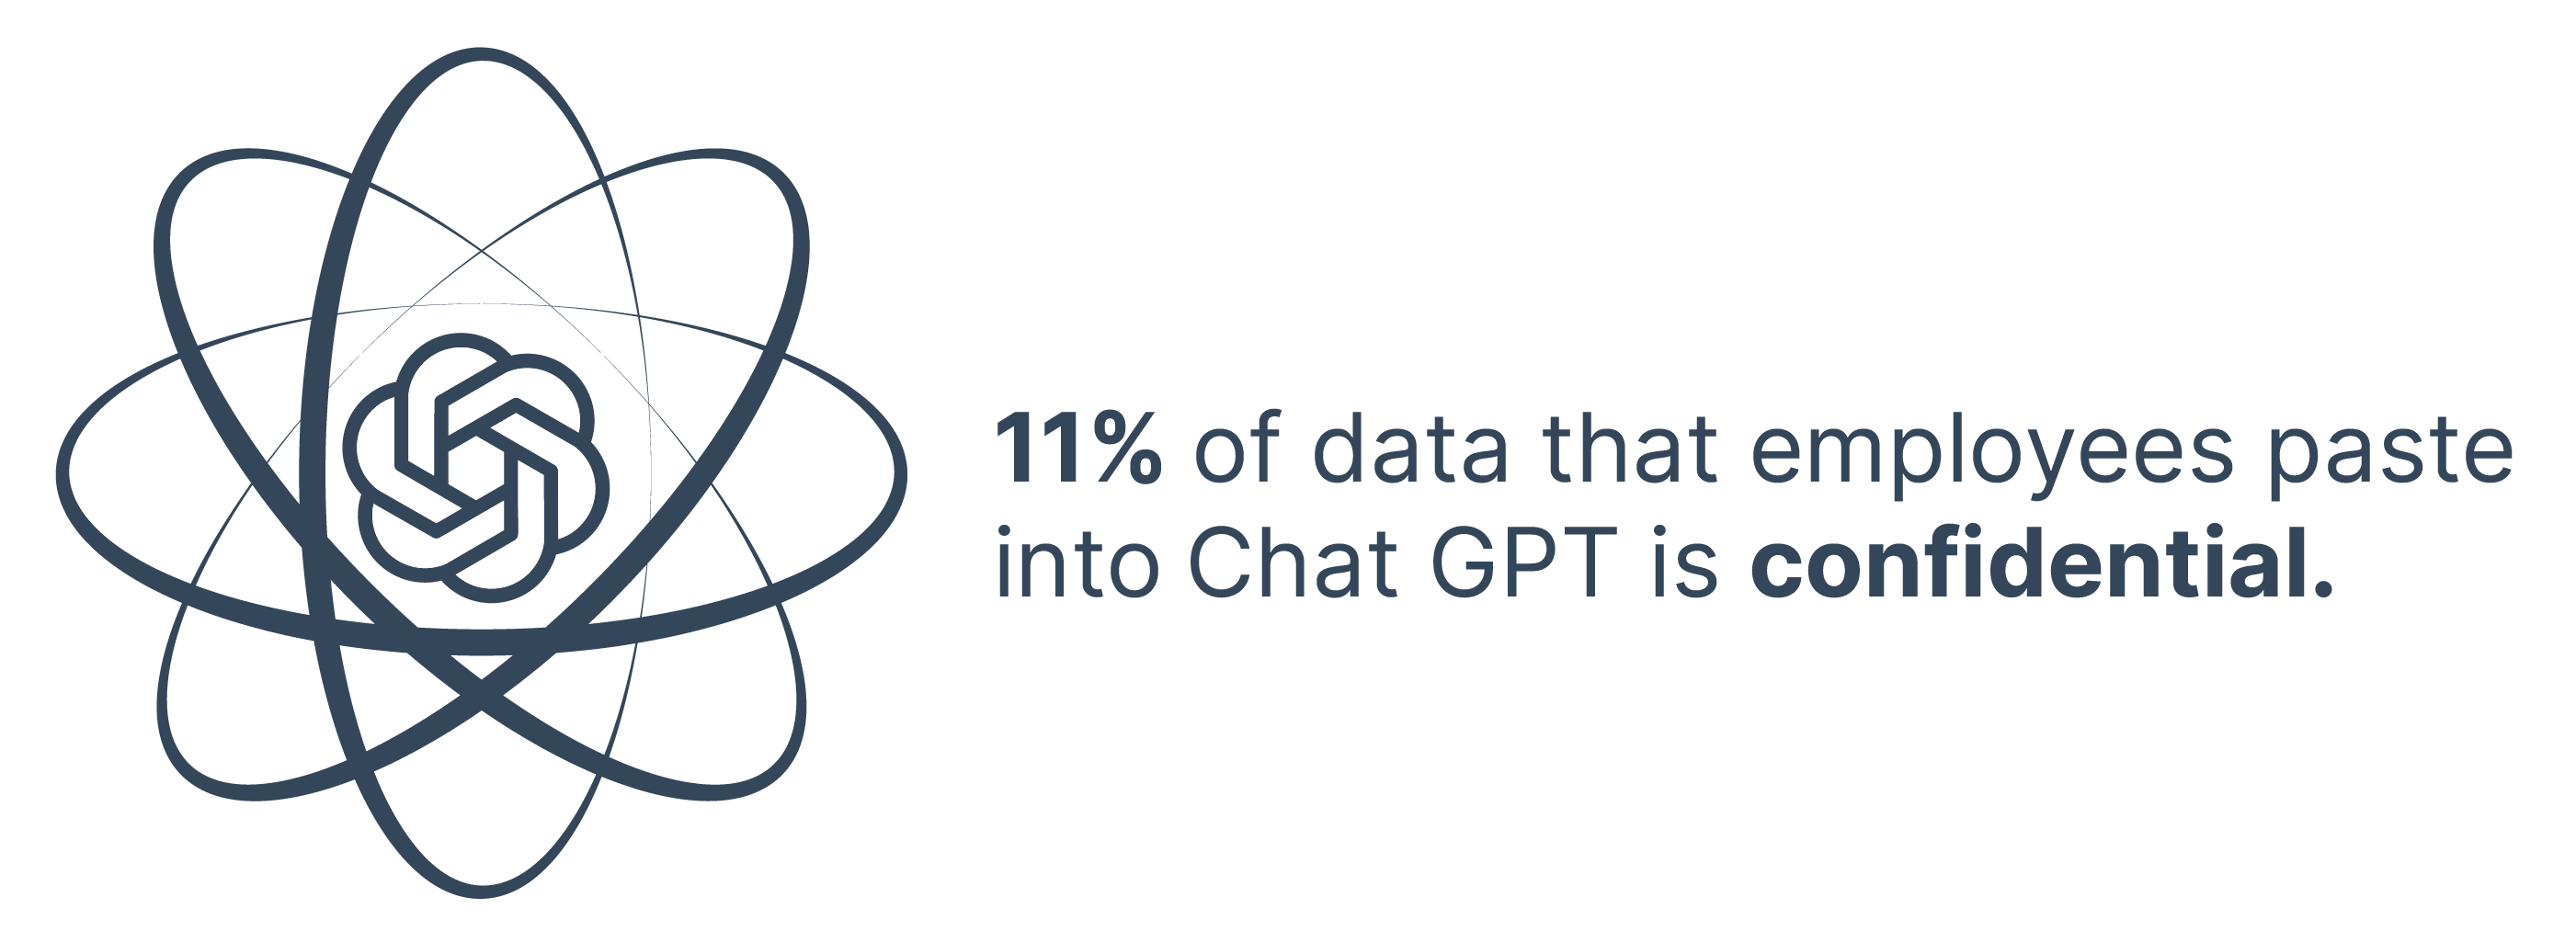 11% of data that employees paste into Chat GPT is confidential 